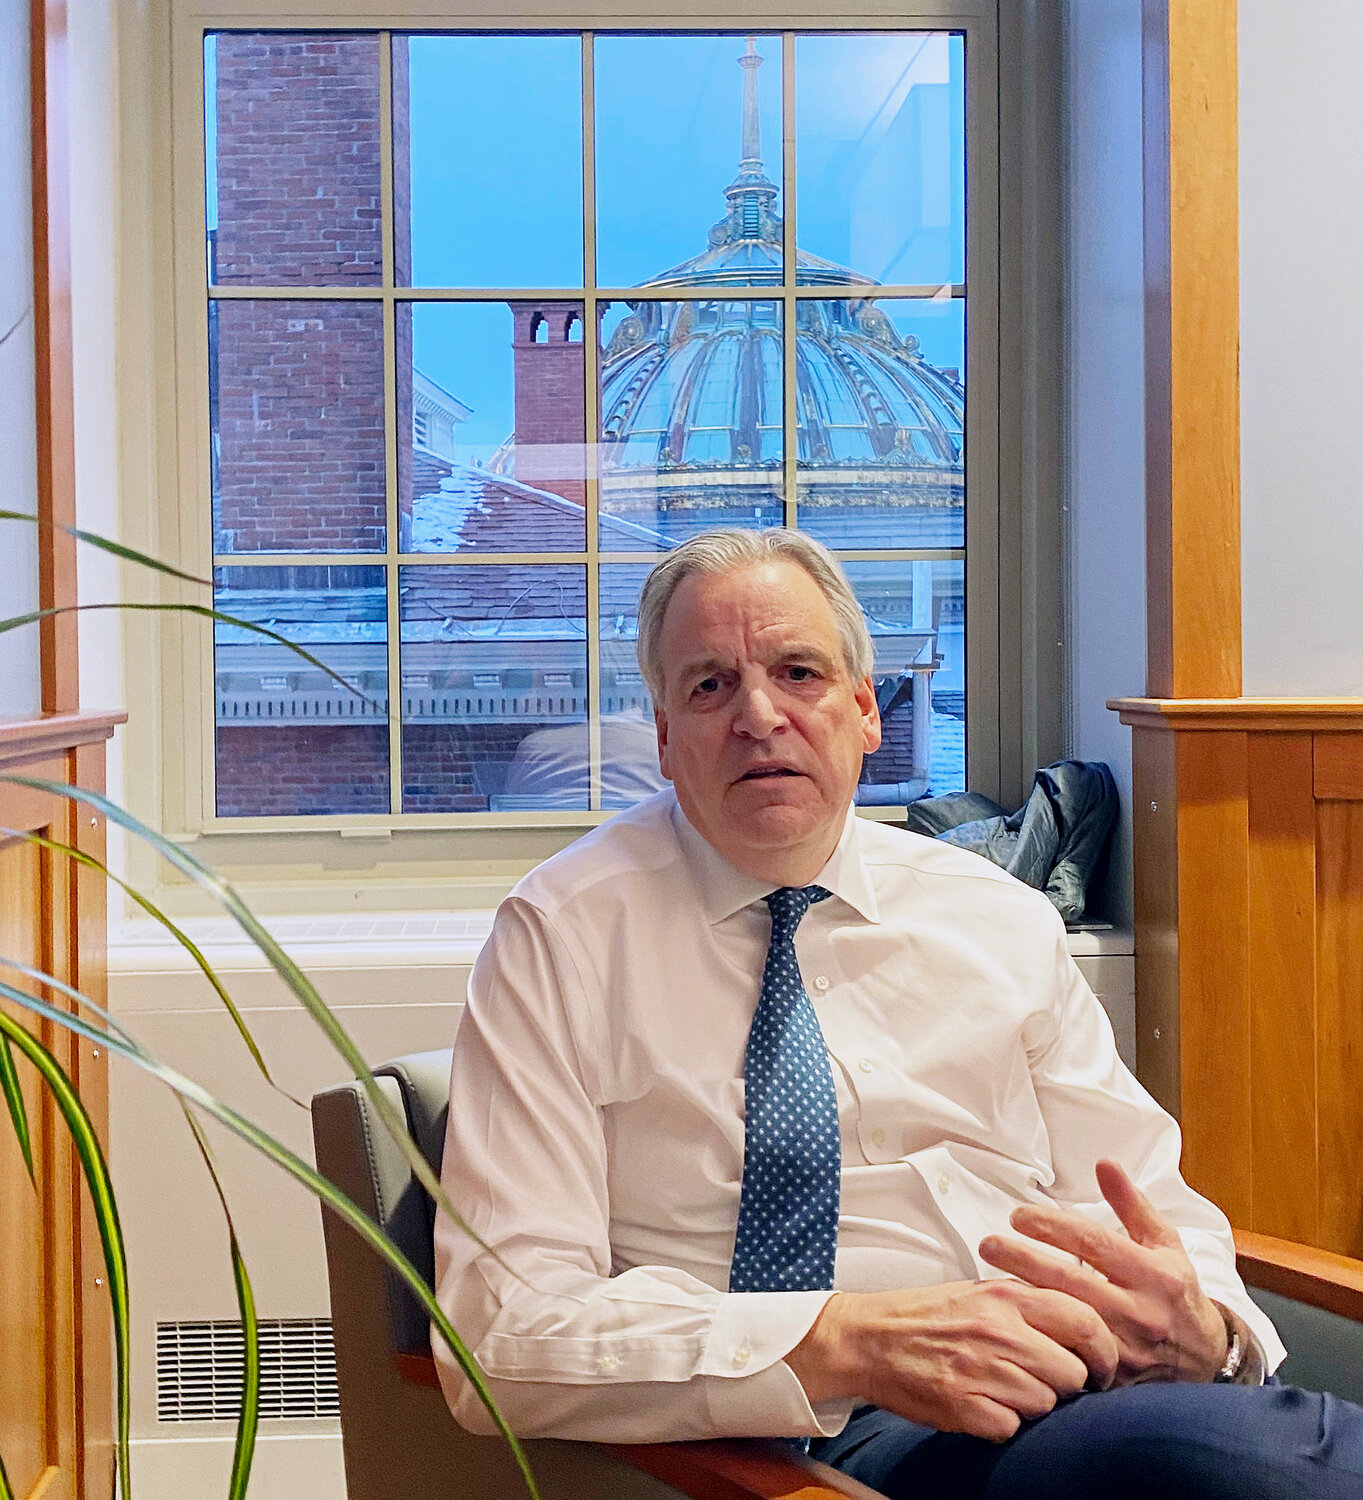 R.I. Attorney General Peter Neronha talks at length in his office about the health care choices facing Rhode Island during a one-on-one interview with ConvergenceRI.